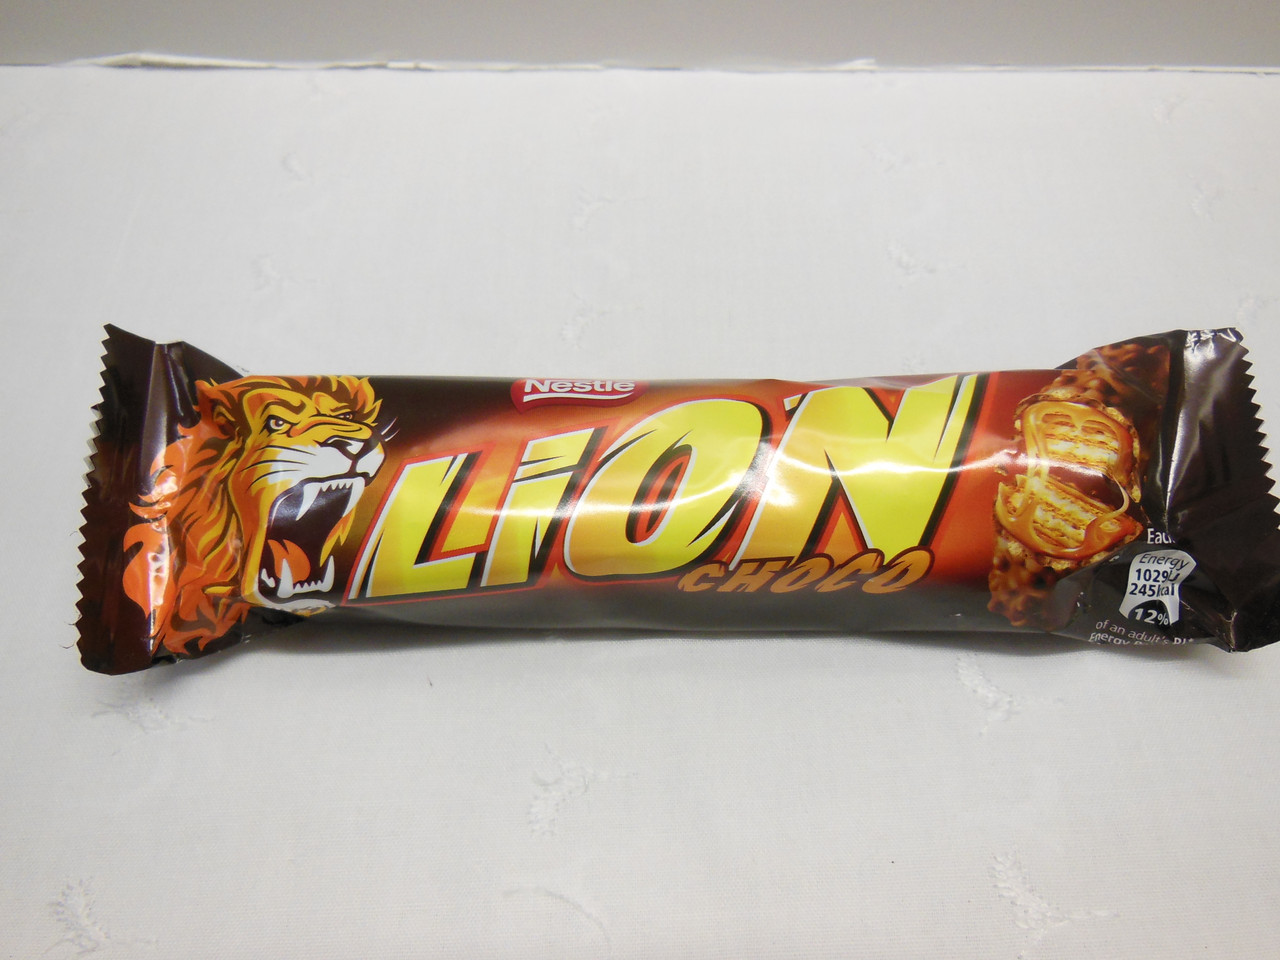  Nestle Choc Bar Lion : Candy And Chocolate Covered Nut Snacks  : Grocery & Gourmet Food